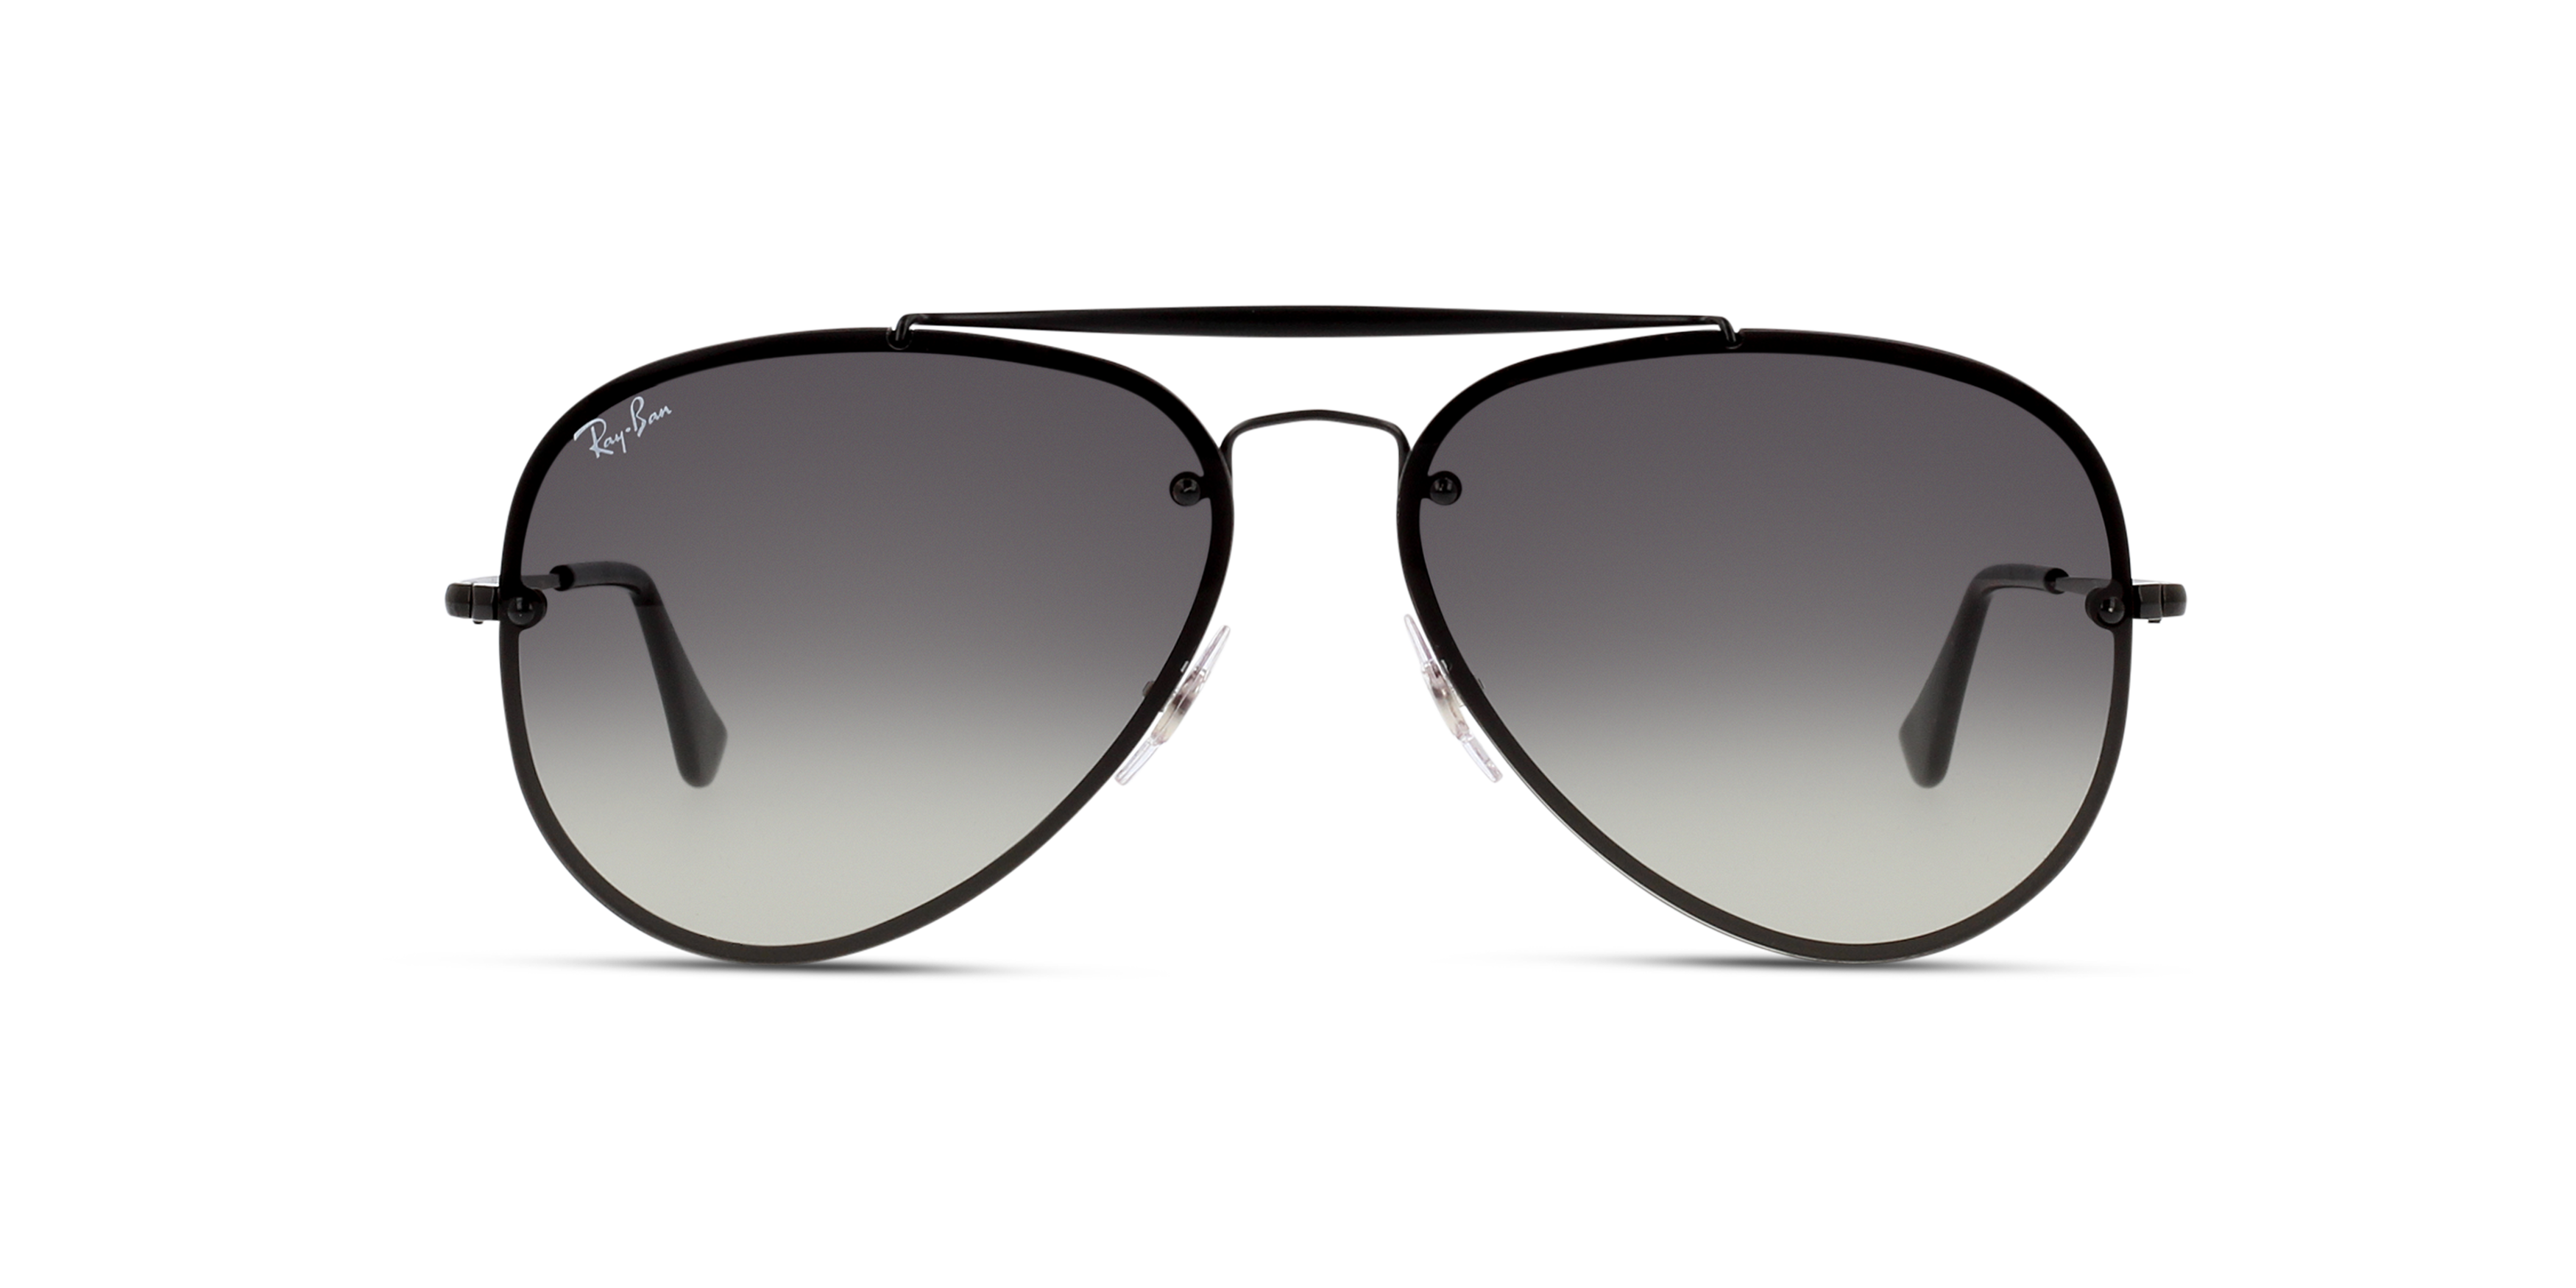 [products.image.front] RAY-BAN RB3584N 153/11